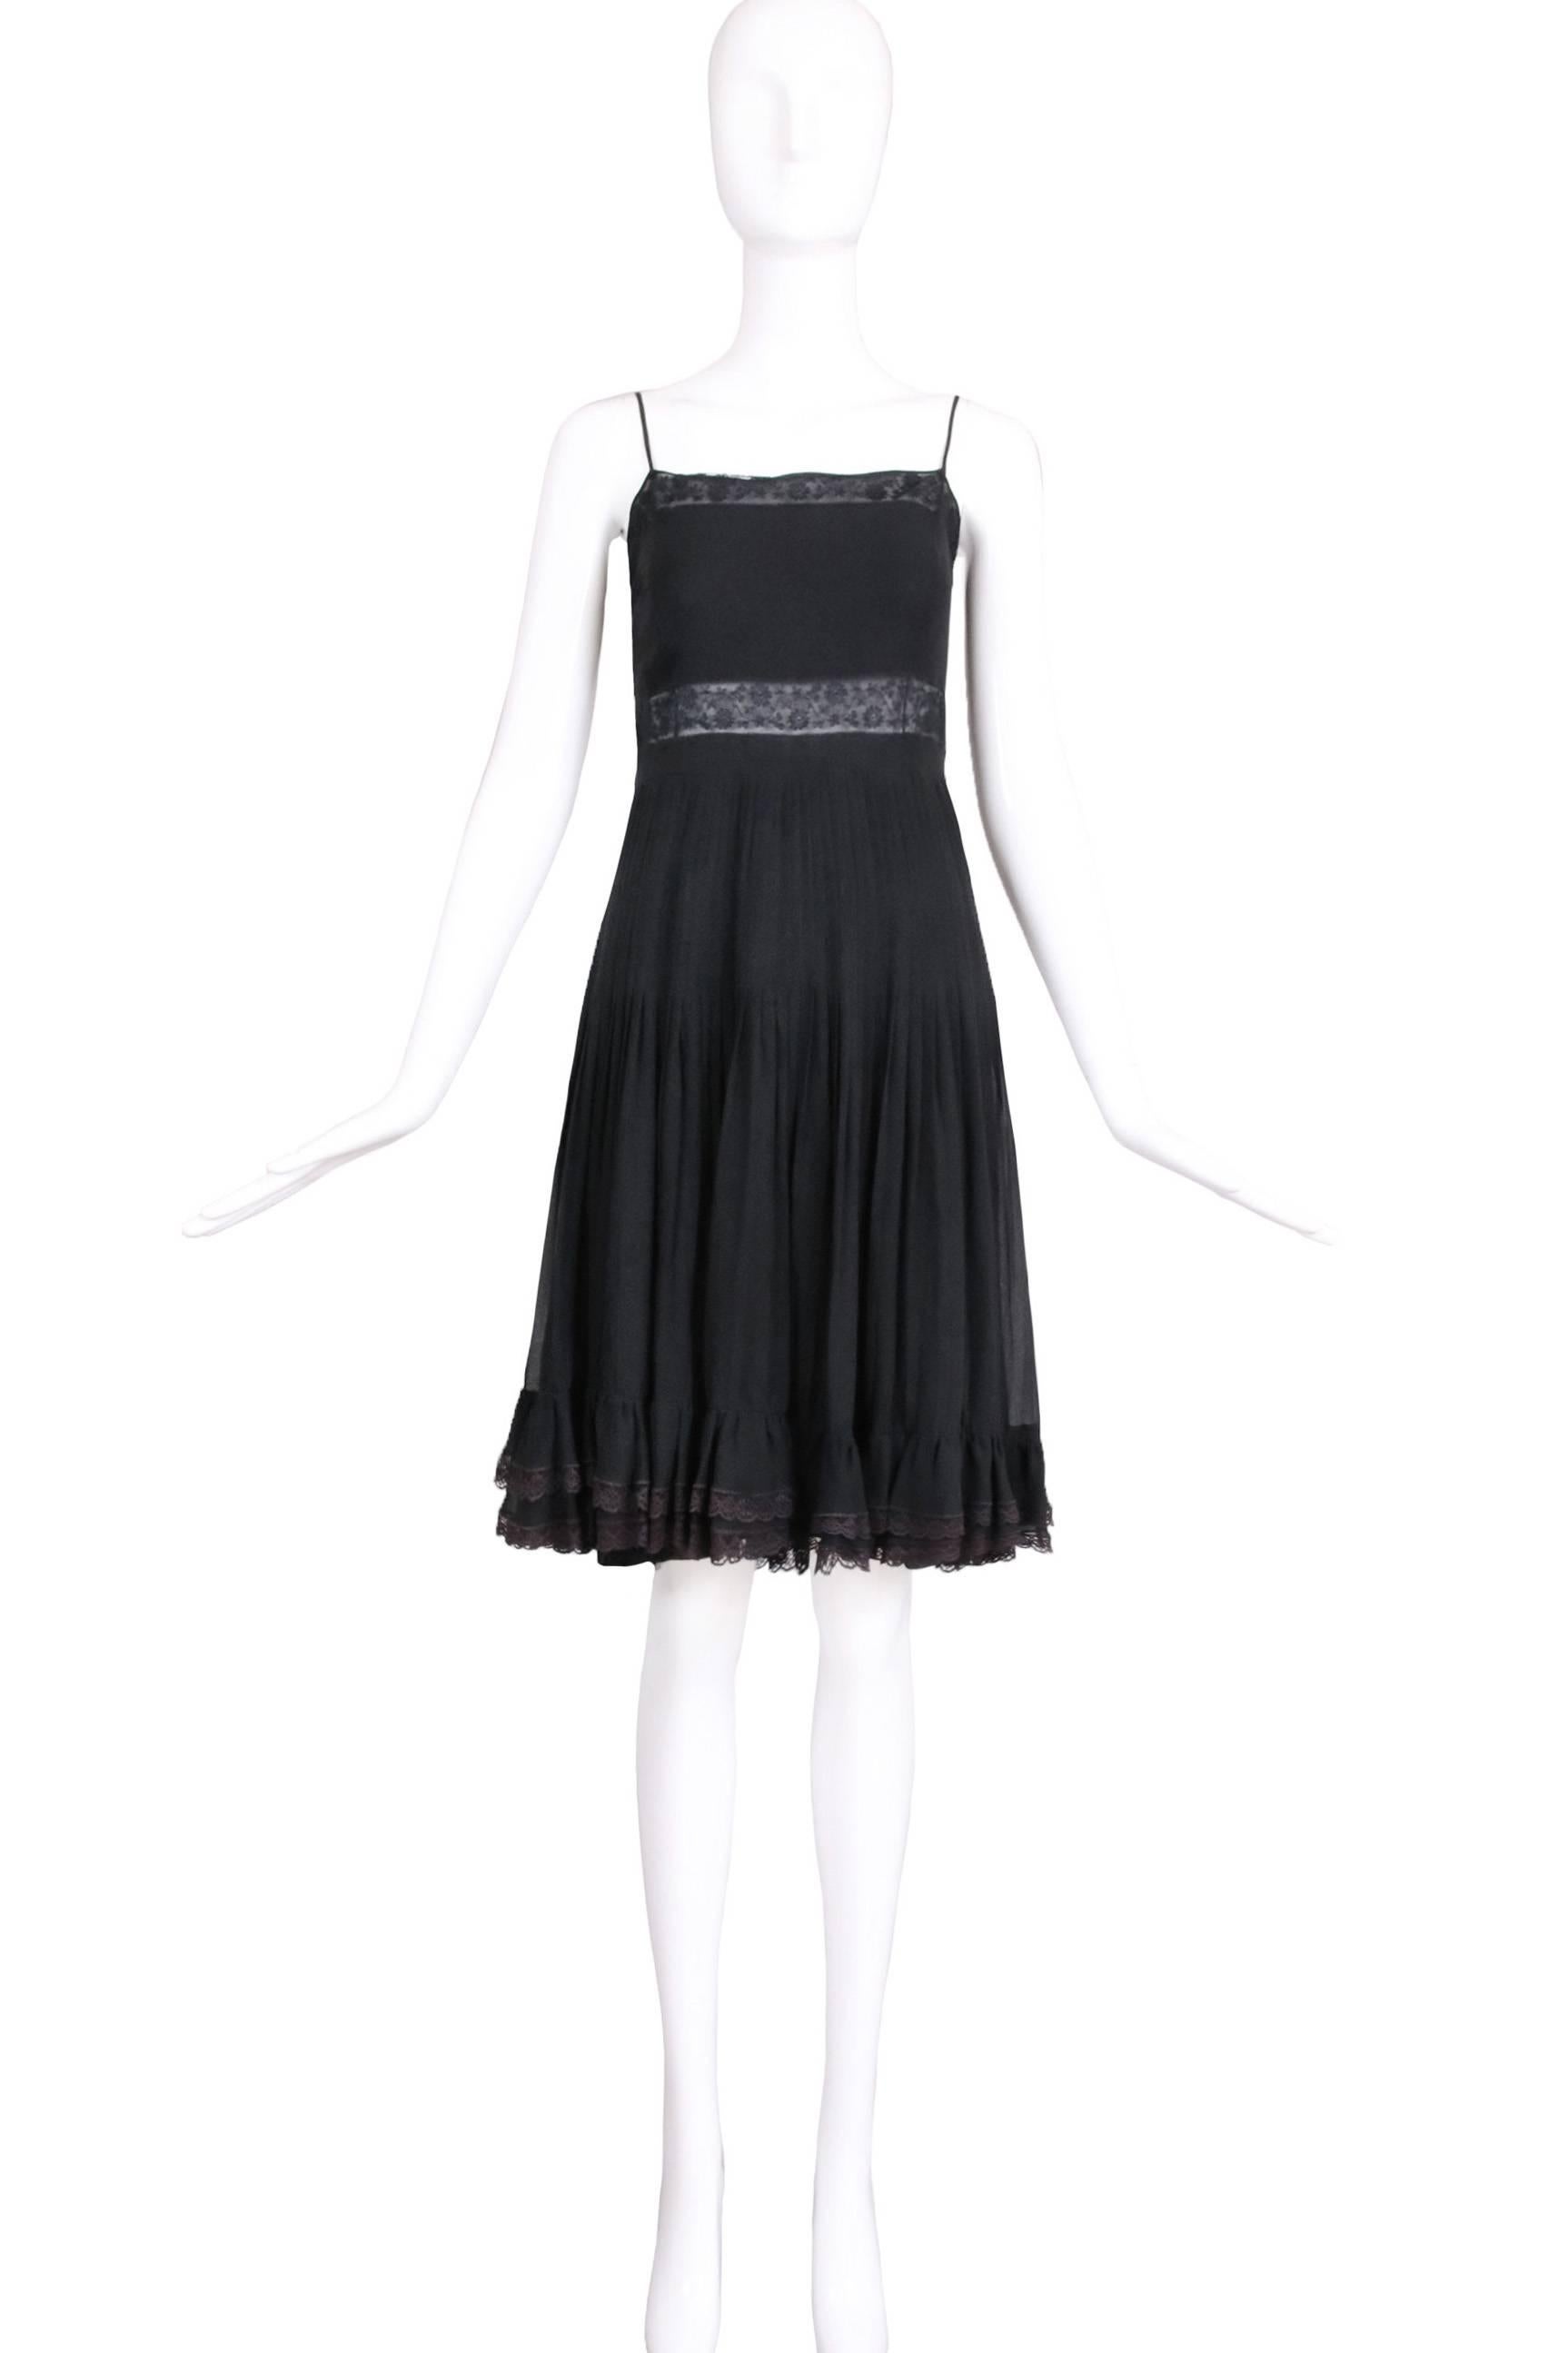 1970's Valentino black silk and chiffon baby doll dress with spaghetti straps and pleated skirt. In excellent condition. Please consult measurements.
MEASUREMENTS:
Bust - 34